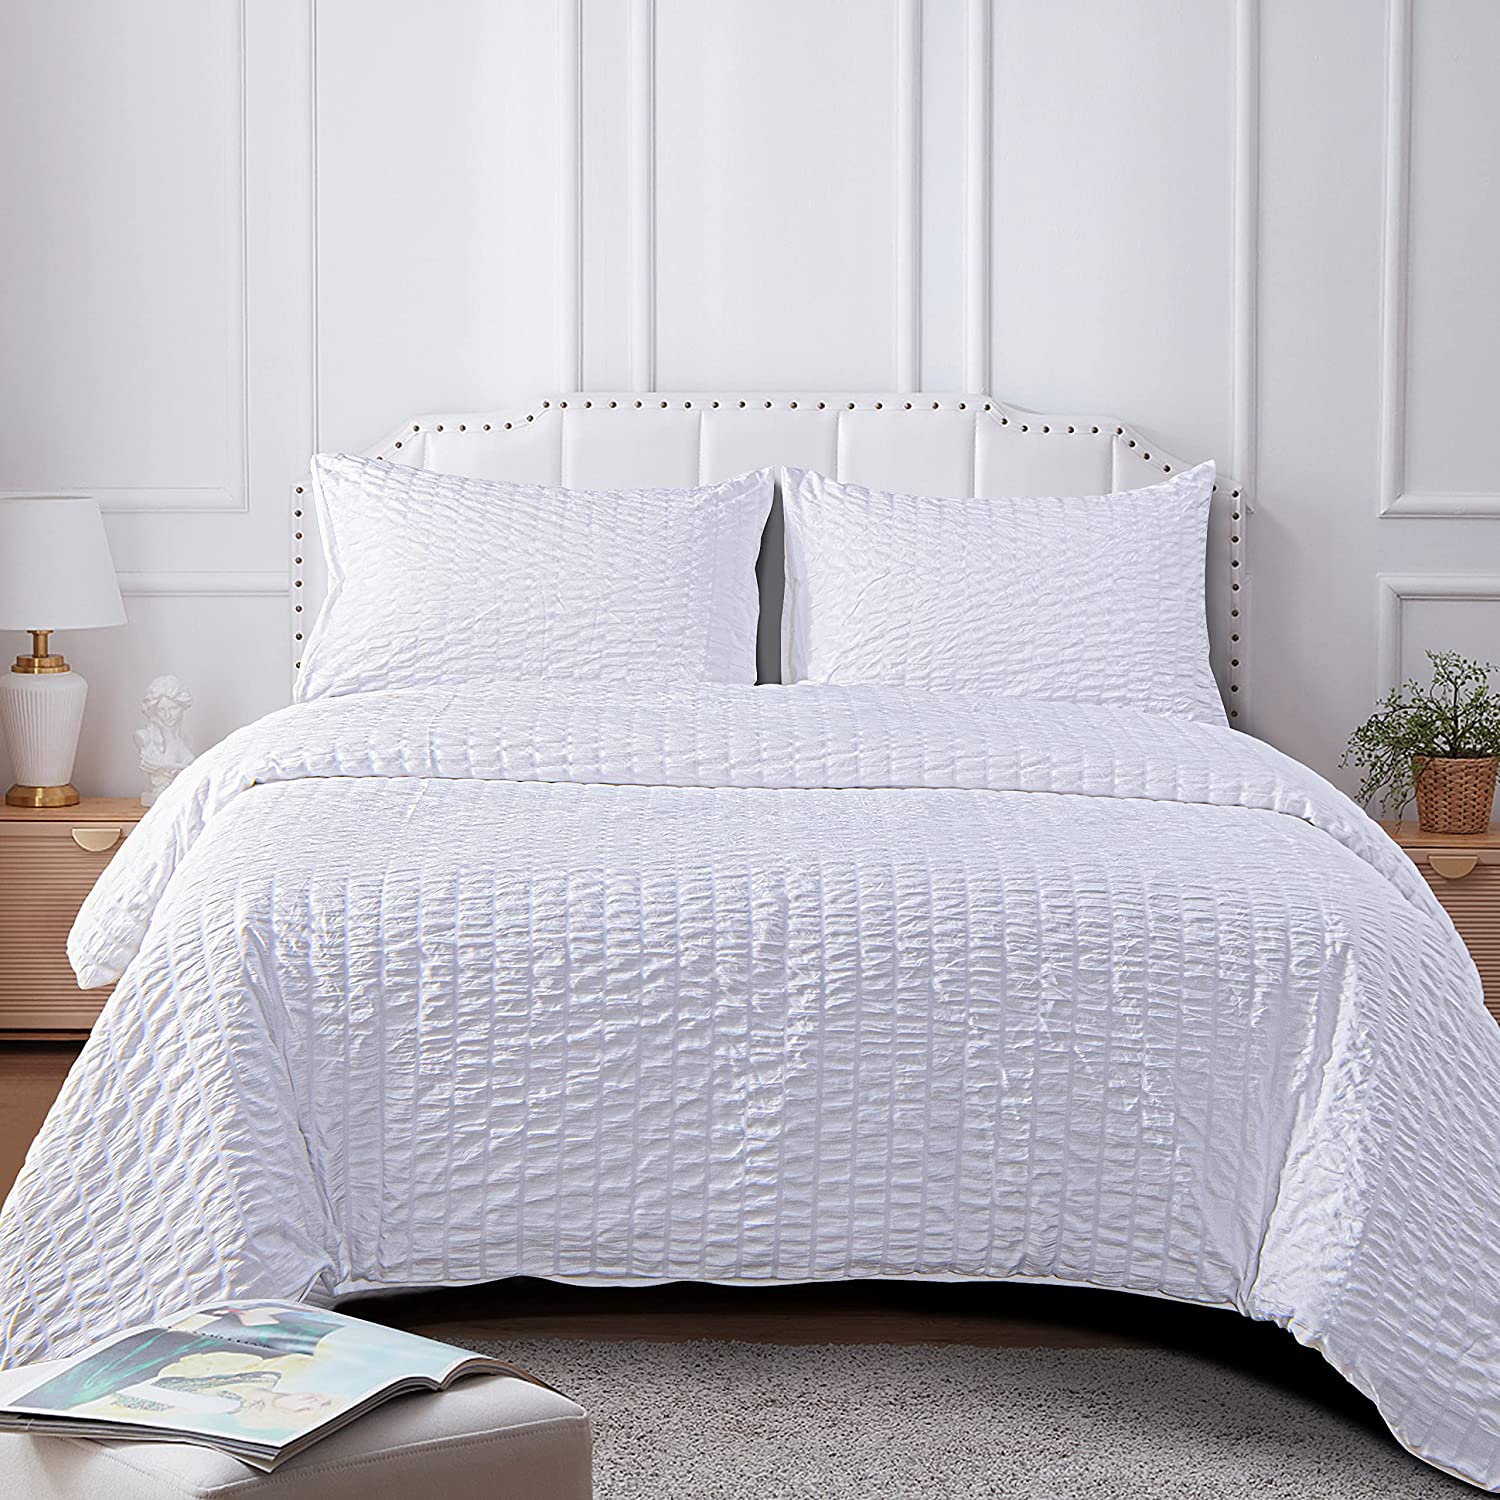 Price:$40.99  3 Pieces King Duvet Cover Set, Seersucker Textured Stripe Washed Microfiber Comforter Cover with Zipper Closure, 104 x 90 Inches, White : Home & Kitchen